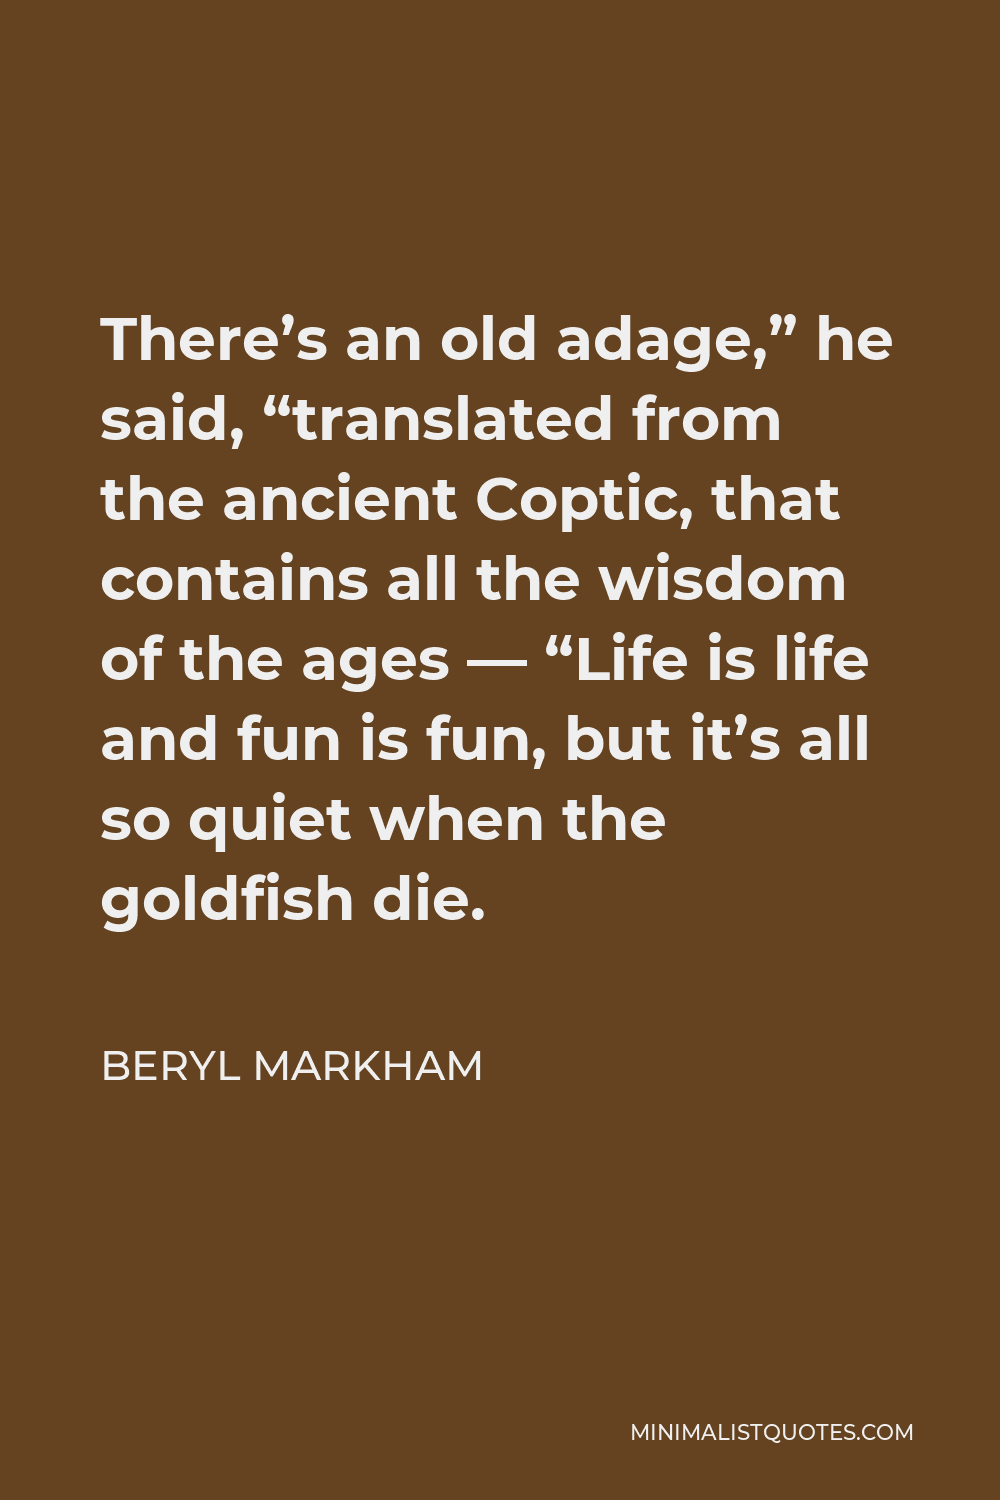 Beryl Markham Quote - There’s an old adage,” he said, “translated from the ancient Coptic, that contains all the wisdom of the ages — “Life is life and fun is fun, but it’s all so quiet when the goldfish die.